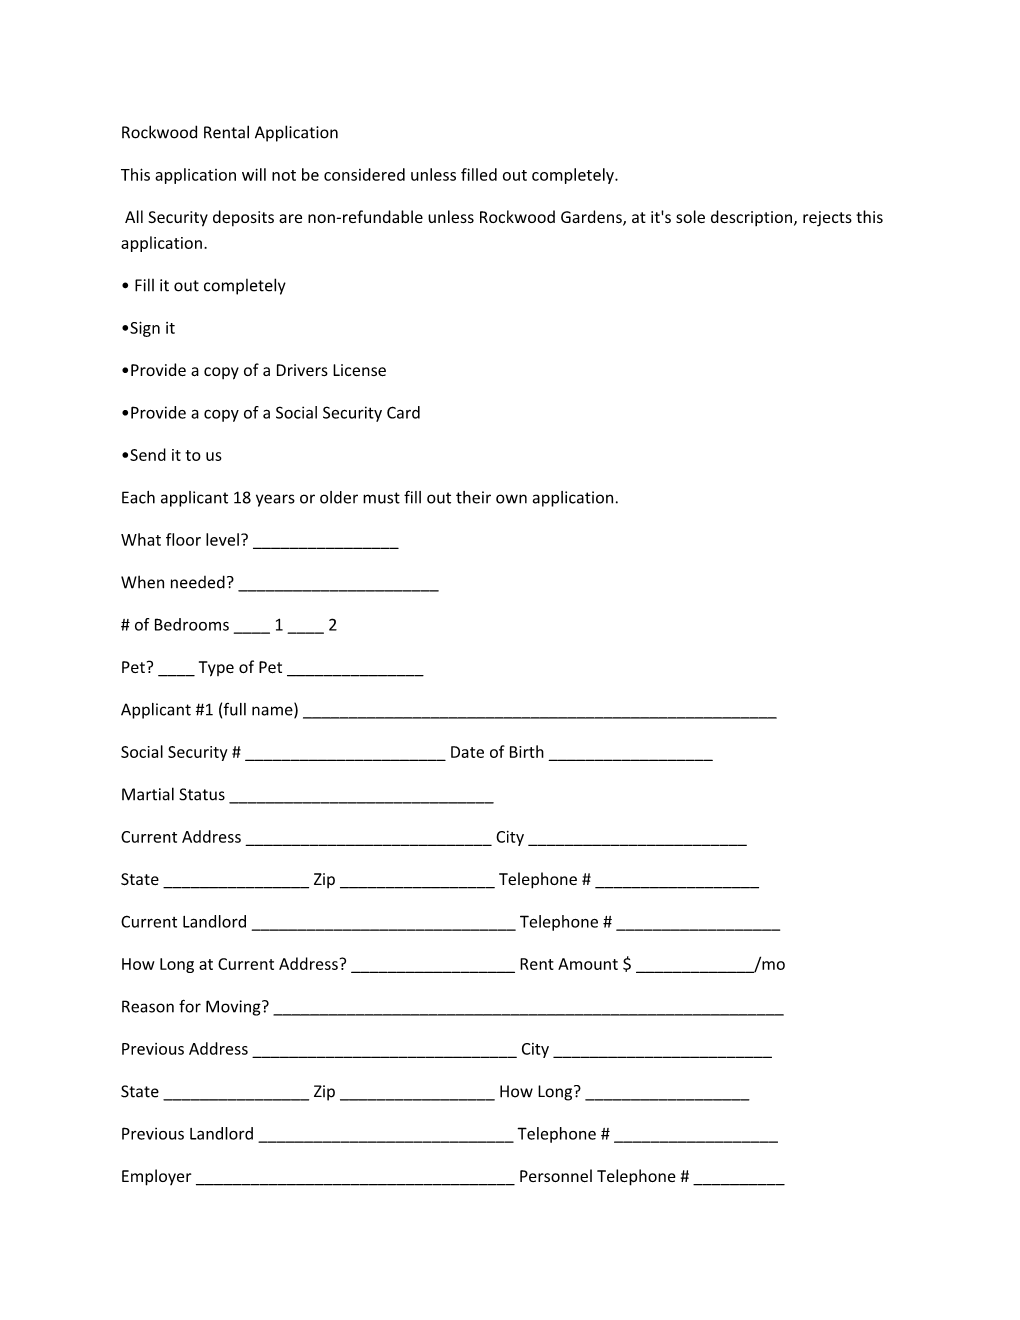 This Application Will Not Be Considered Unless Filled out Completely